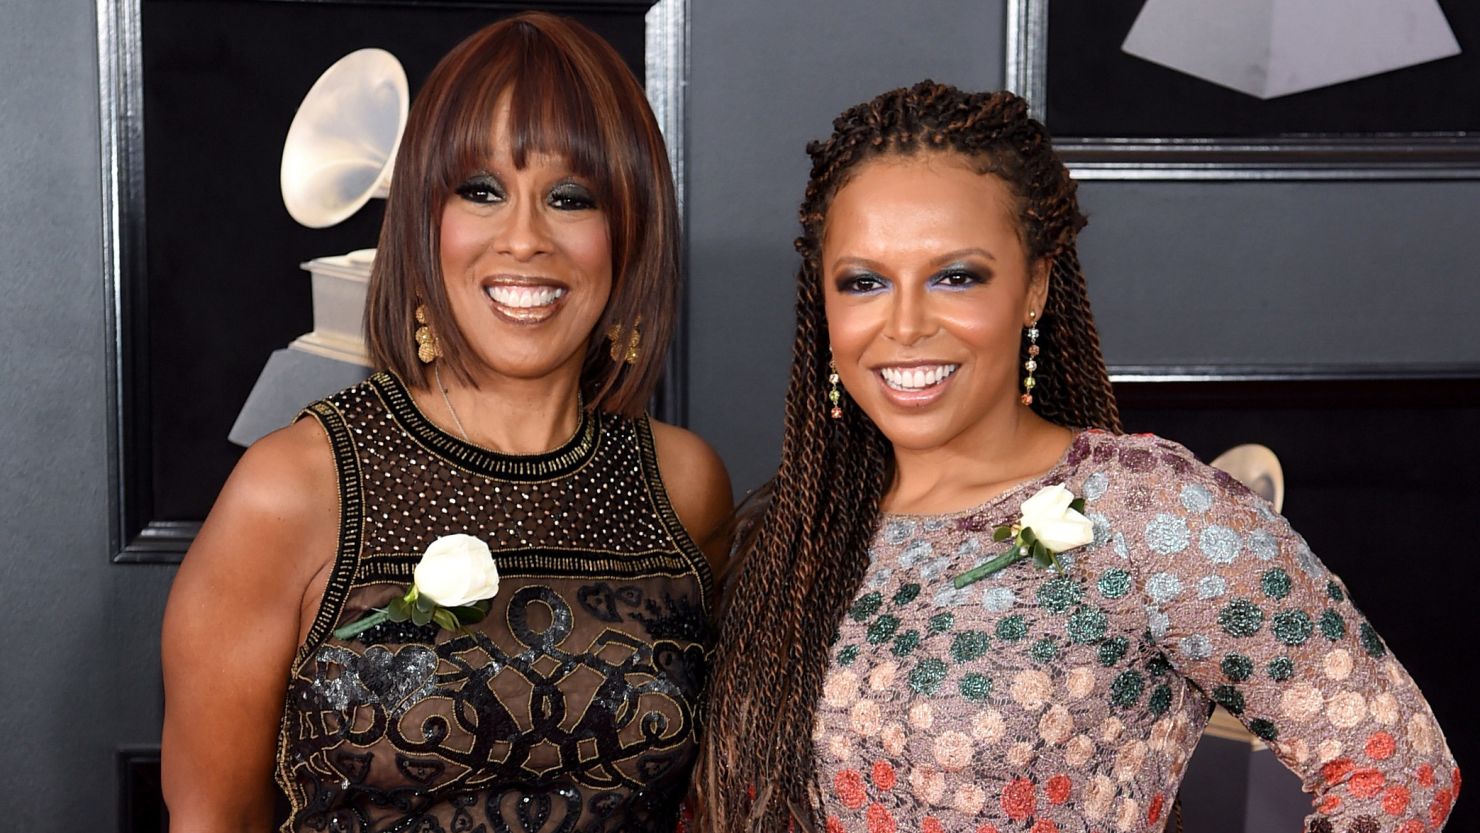 Gayle King and daughter Kirby Bumpus attend the 60th Annual GRAMMY Awards at Madison Square Garden on January 28, 2018 in New York City.